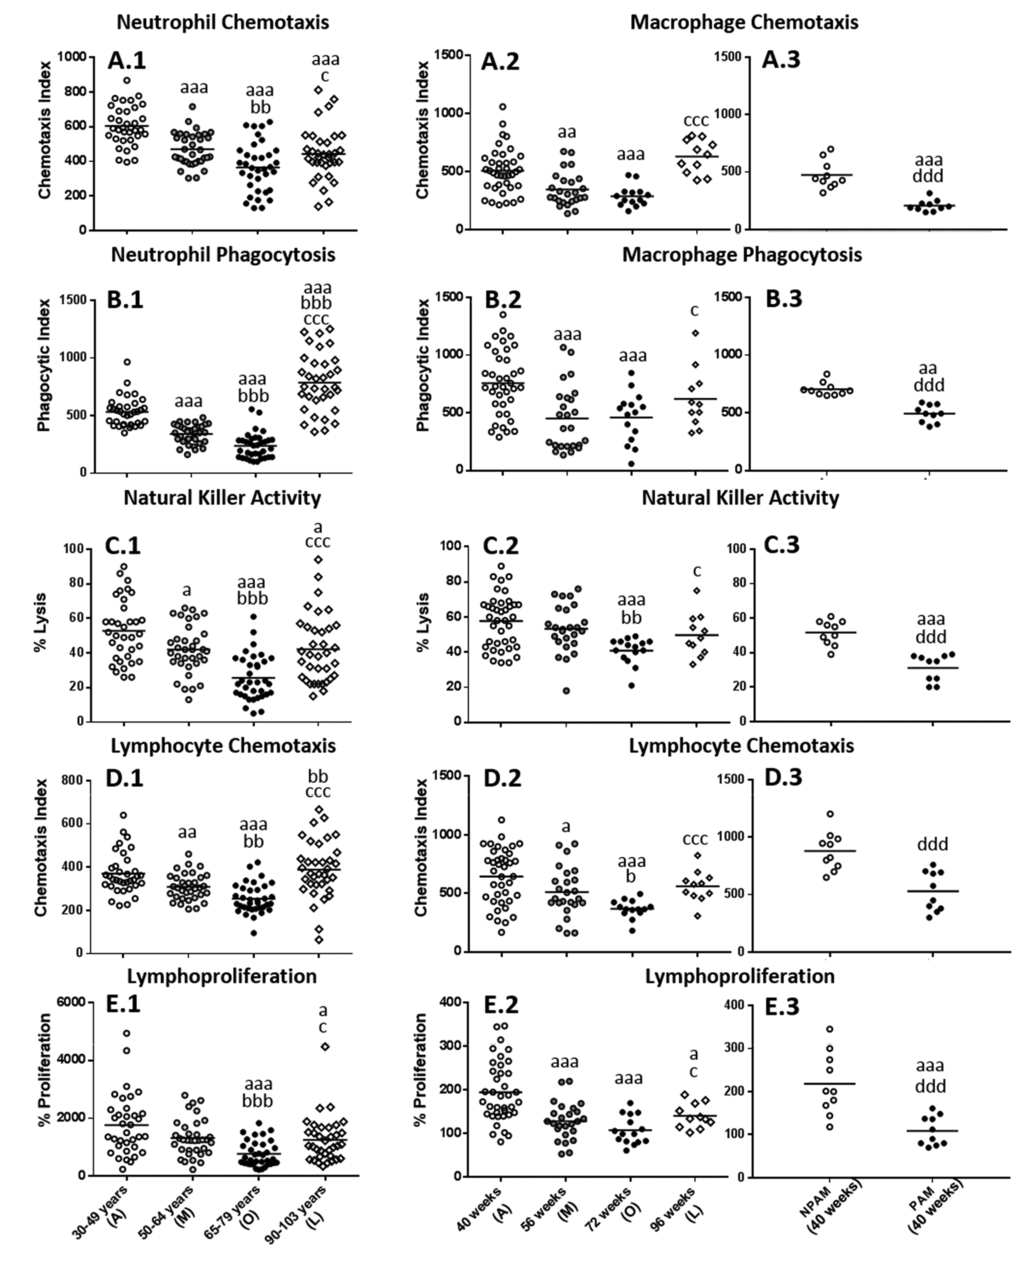 Age-related changes in immune functions in peripheral blood leukocytes from humans and in peritoneal leukocytes from mice. (A) Phagocytic Index: number of latex beads ingested per 100 human neutrophils (A.1) or mouse macrophages (A.2 and A.3); (B) Chemotaxis Index: number of phagocytes on the filter, human neutrophils (B.1) or mouse macrophages (B.2 and B.3); (C) NK cytotoxic activity (percentage of lysis of tumor cells) of human leukocytes (C.1) or mouse leukocytes (C.2 and C.3). (D) Chemotaxis Index: number of human lymphocytes on the filter (D.1) or mouse lymphocytes (D.2 and D.3); (E) Percentage of proliferation of lymphocytes in response to the mitogen Phytohaemagglutinin in the case of humans (E.1) and in response to Concanavalin A in the case of mice (E.2 and E.3). The results corresponding to peritoneal leukocytes from adult prematurely-aging mice (PAM) and non-prematurely-aging mice (NPAM) are shown in A.3, B.3, C.3, D.3, and E.3. A: Adult; M: Mature; O: Old; L: Long-Lived; a: P ; aa: P ; aaa: P  with respect to the value in adults. b: P ; bb: P ; bbb: P  with respect to the value in mature individuals. c: P ; cc: P ; ccc: P  with respect to the value in old subjects. d: P ; dd: P ; ddd: P  with respect to the value in NPAM.